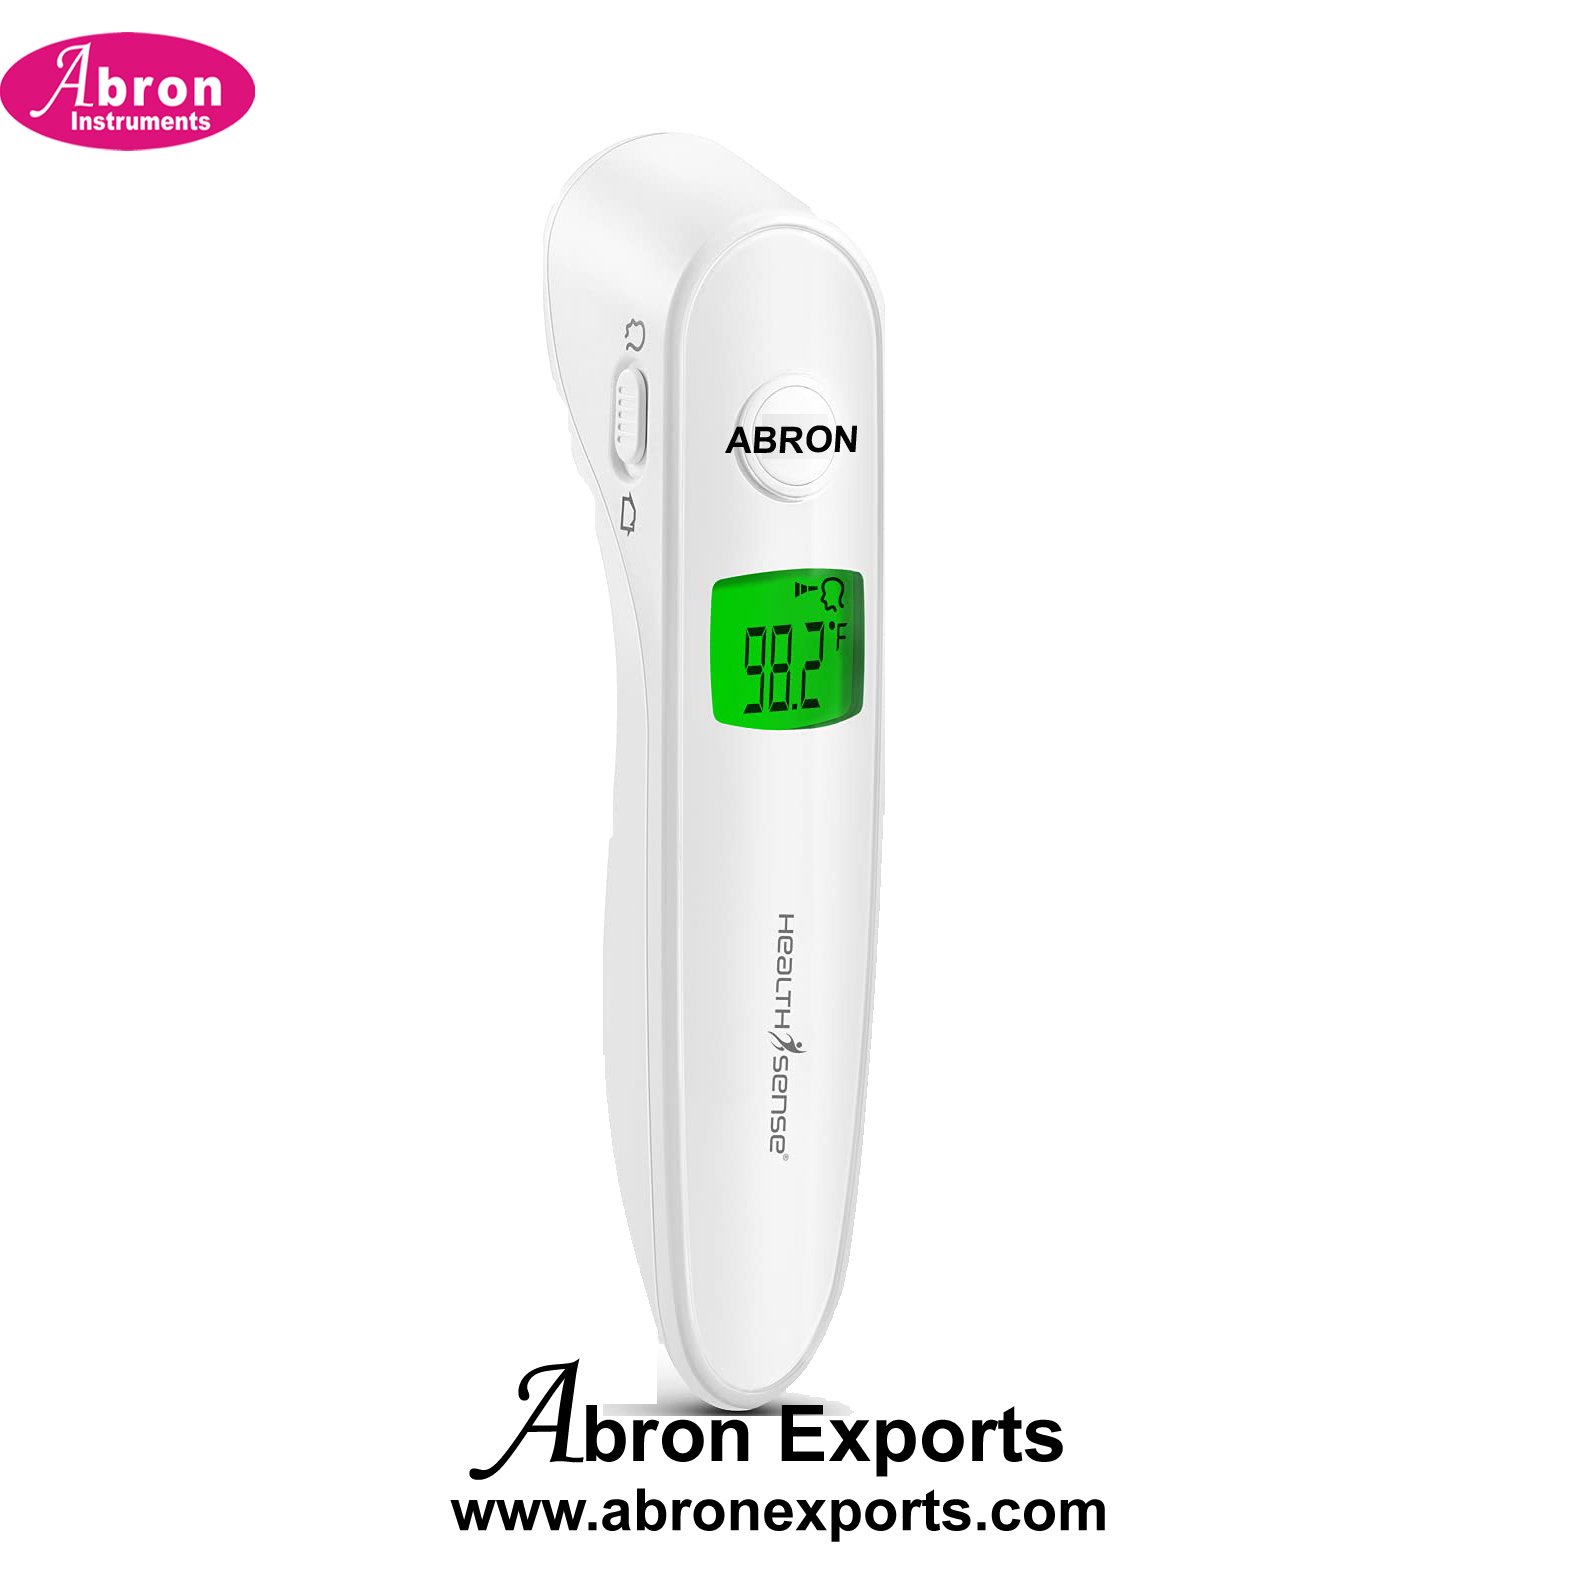 Clinical Thermometer Digital LCD forhead Infrared Backlit for fever non contact no Beap 99 Memory Nurses Hospital Abron ABM-2185H 